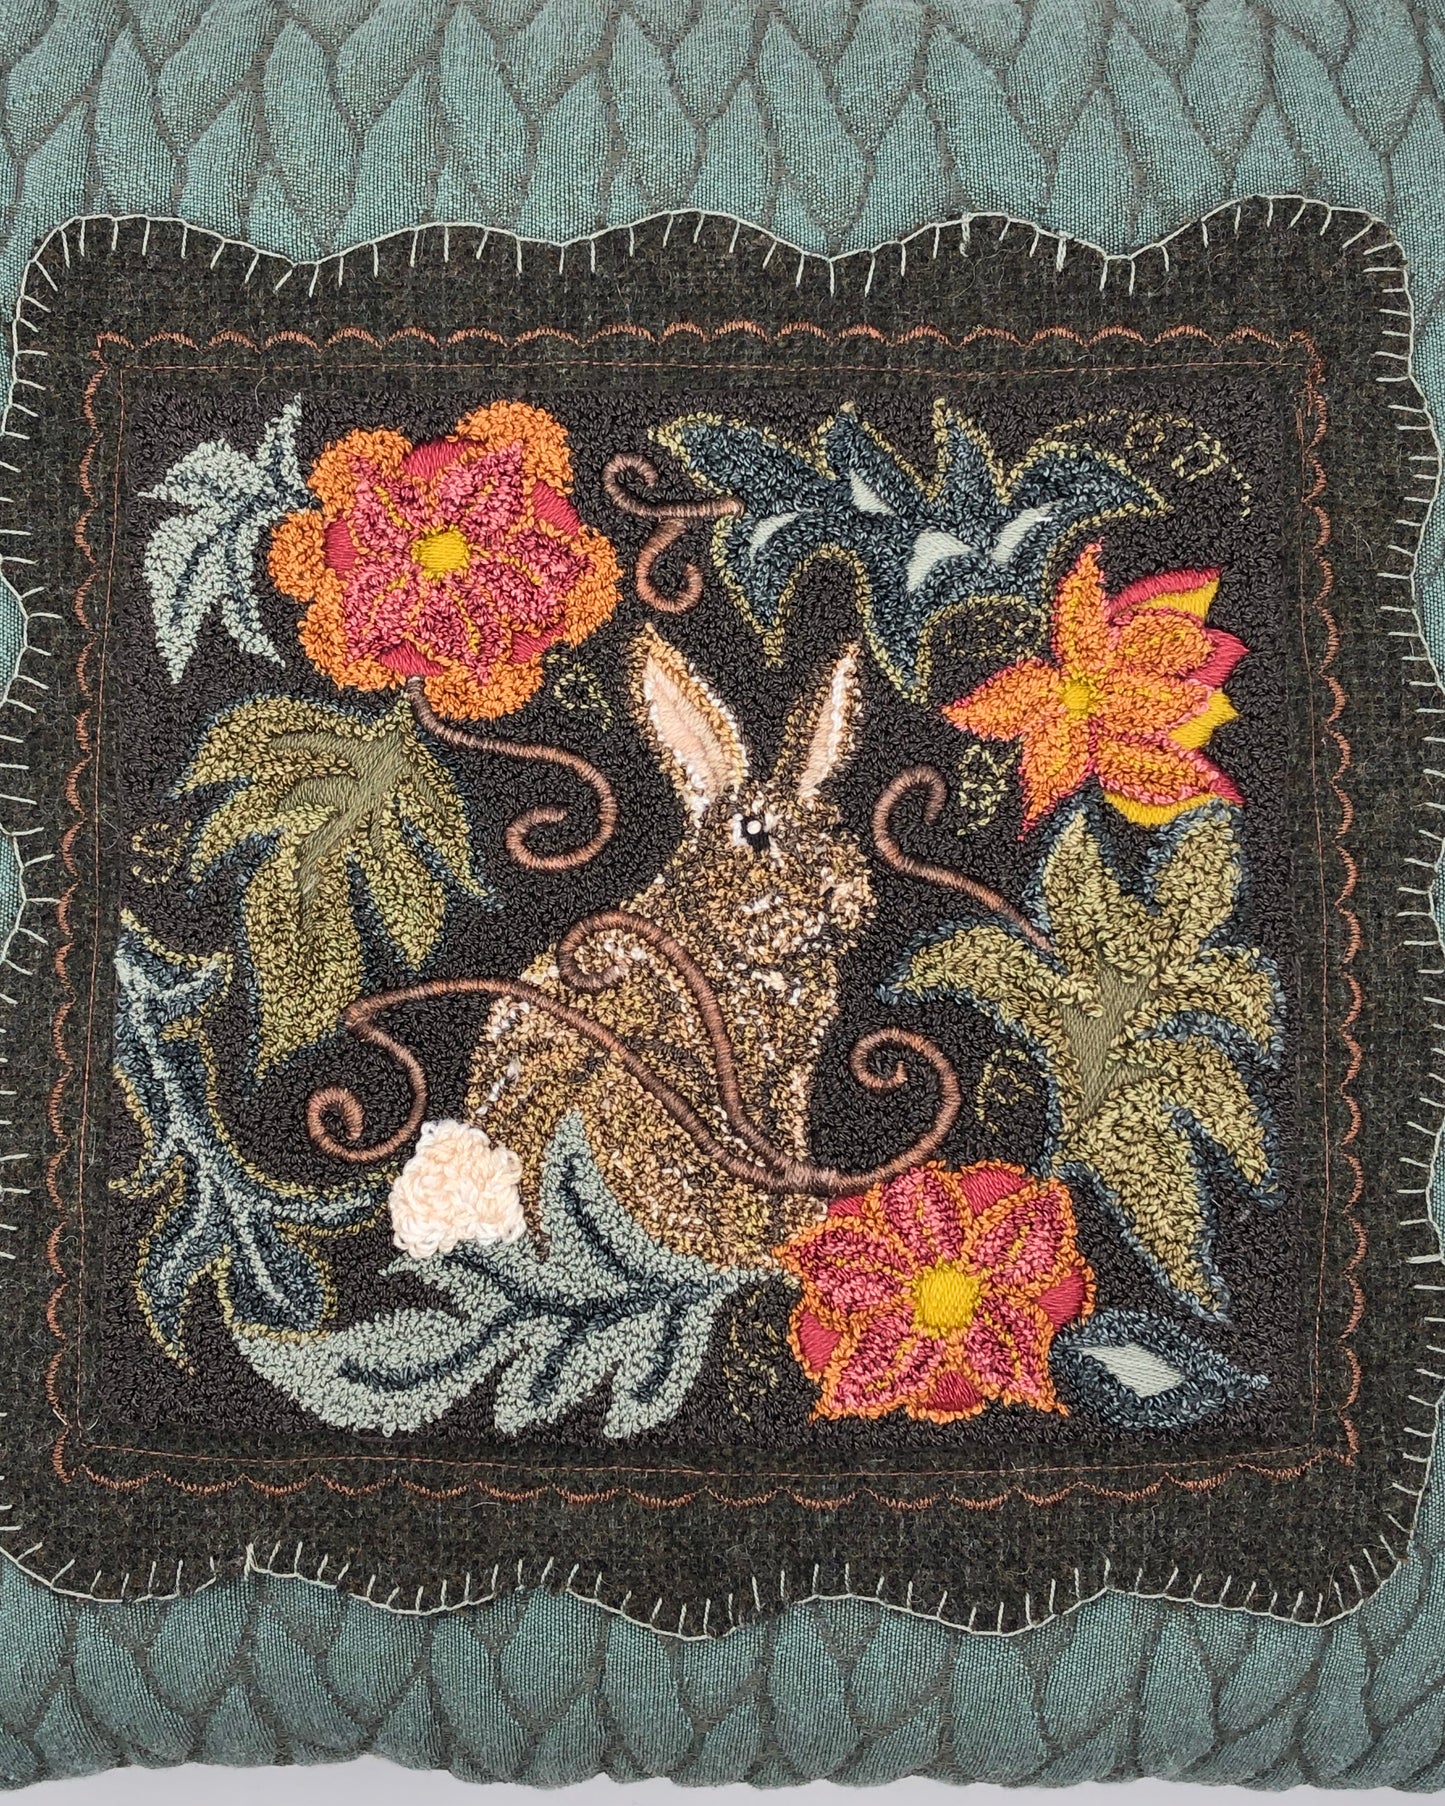 Garden Rabbit Punch Needle PDF Digital Download Pattern, by Orphaned Wool. Can be finished using DMC floss or Valdani Threads. Lovey Bunny Pattern with flowers and Foliage.